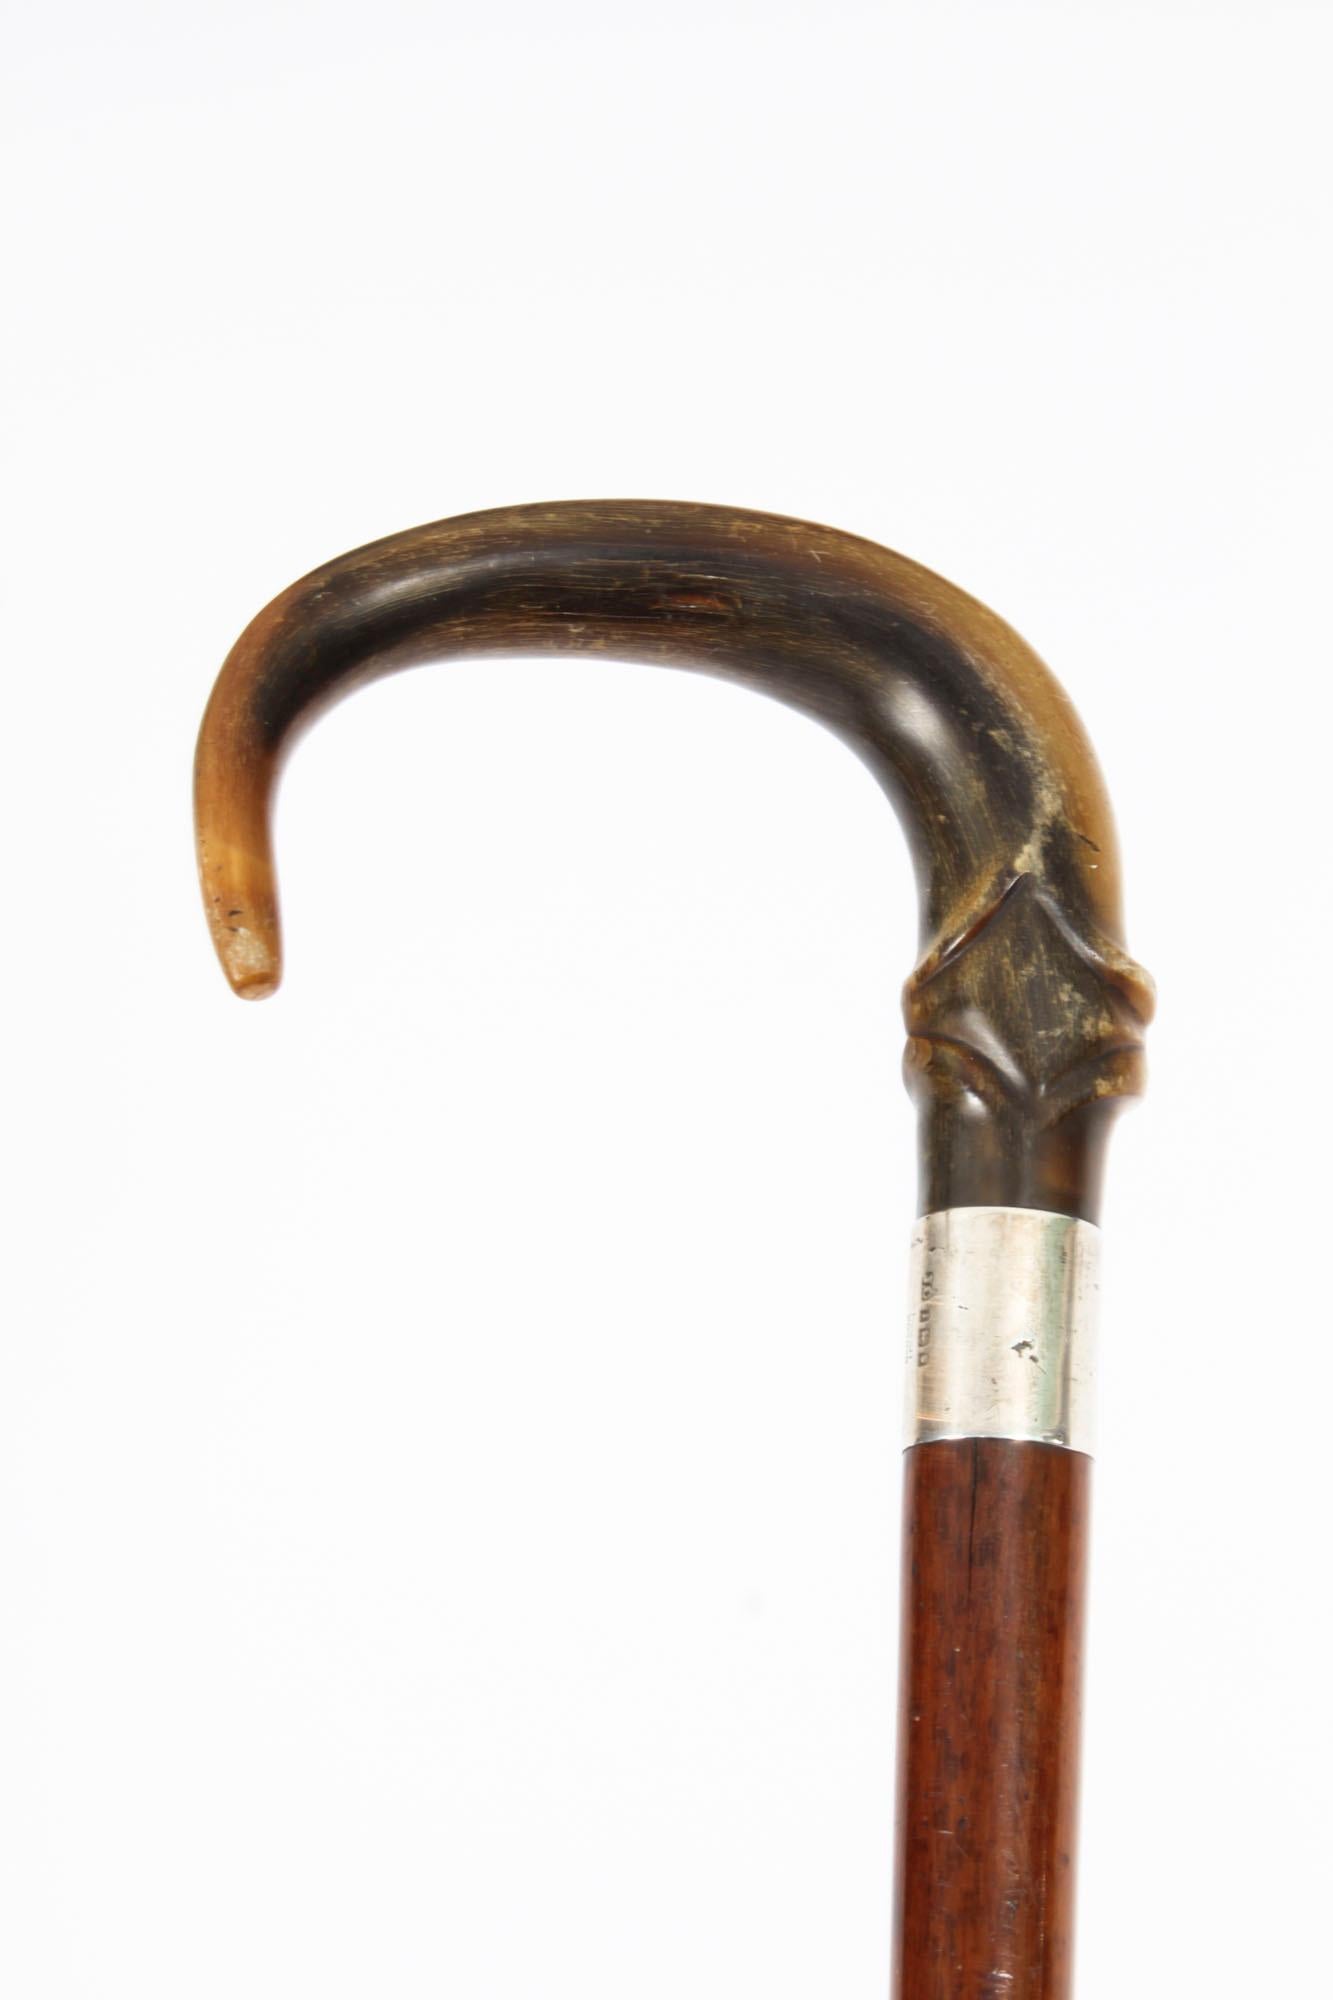 This is a beautiful antique Edwardian horn handled walking stick, the silver collar bears hallmarks for the maker Ben Cox, London and is dated 1904.
 
The handle is carved in a hook shape and features an elegant silver collar.
The sturdy Malacca